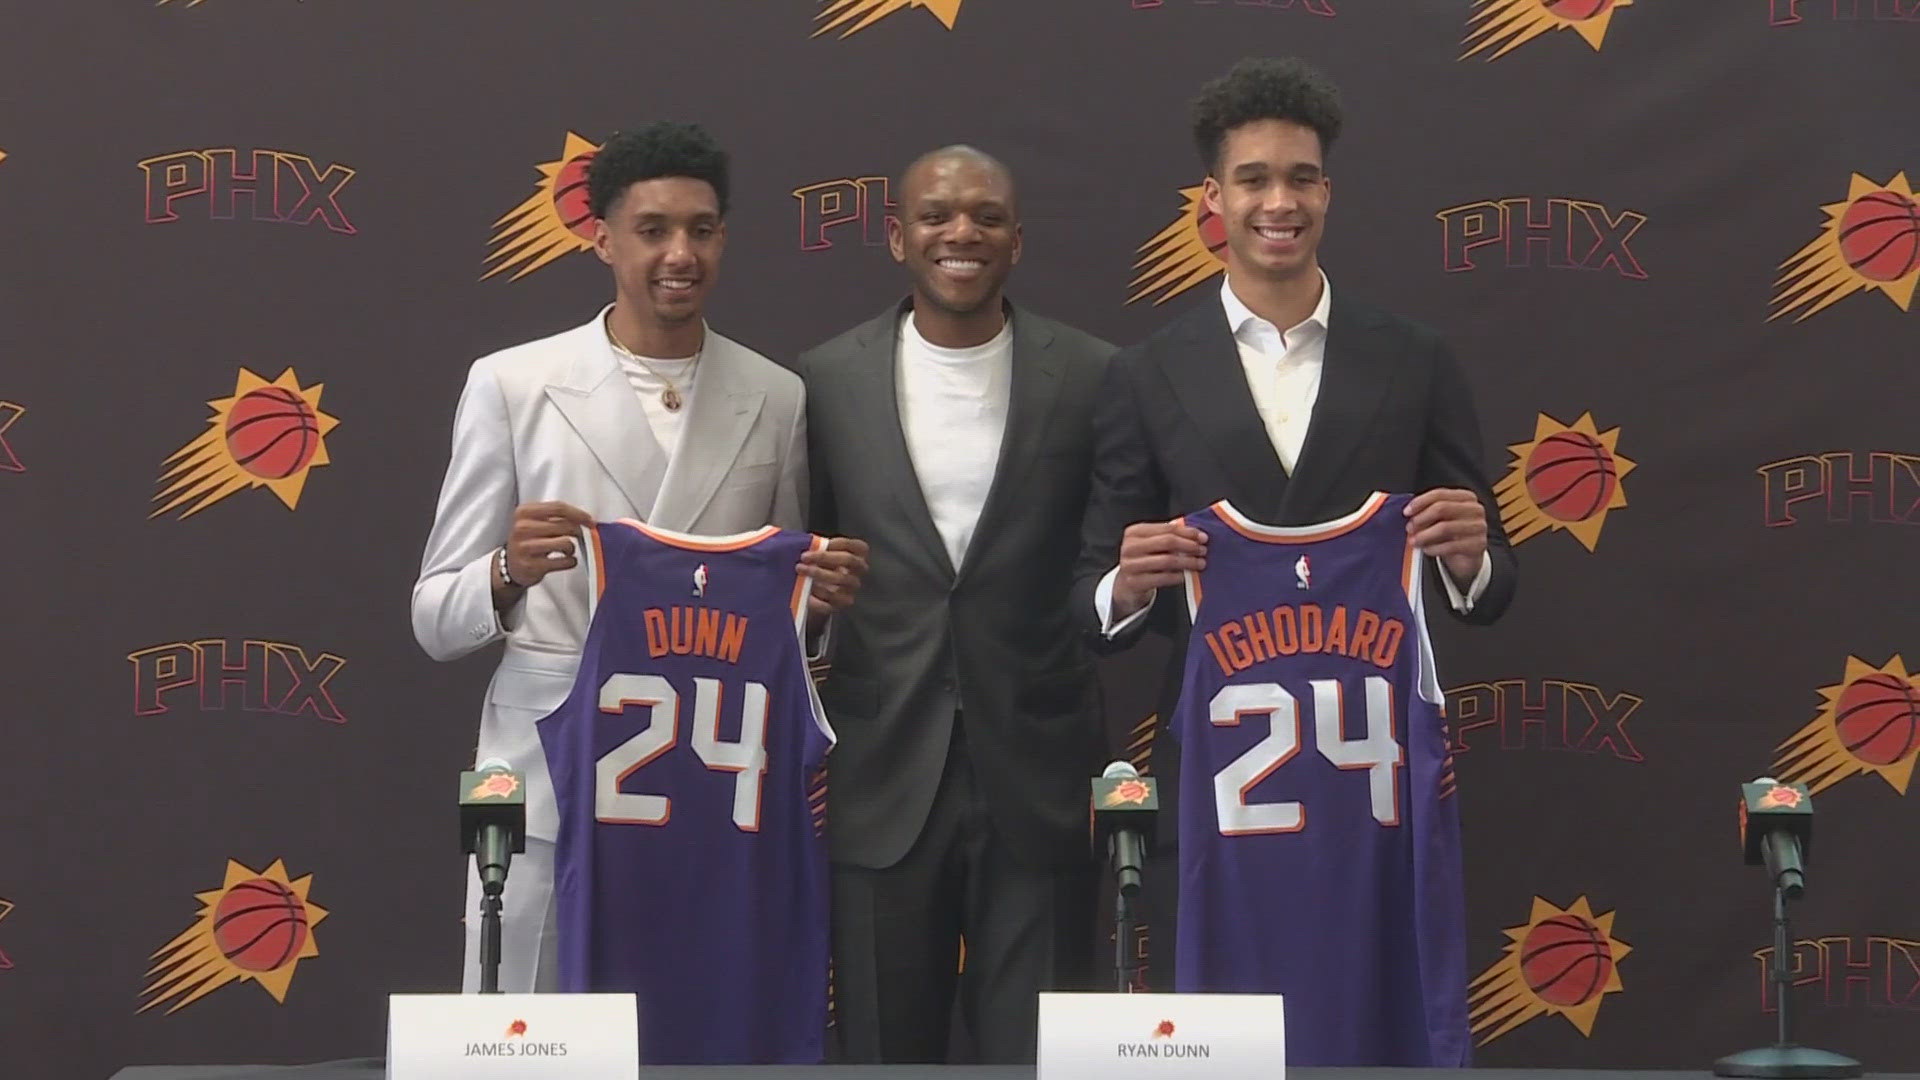 Suns GM James Jones said they were fortunate to select the two players that stood out to them during the pre-draft process.